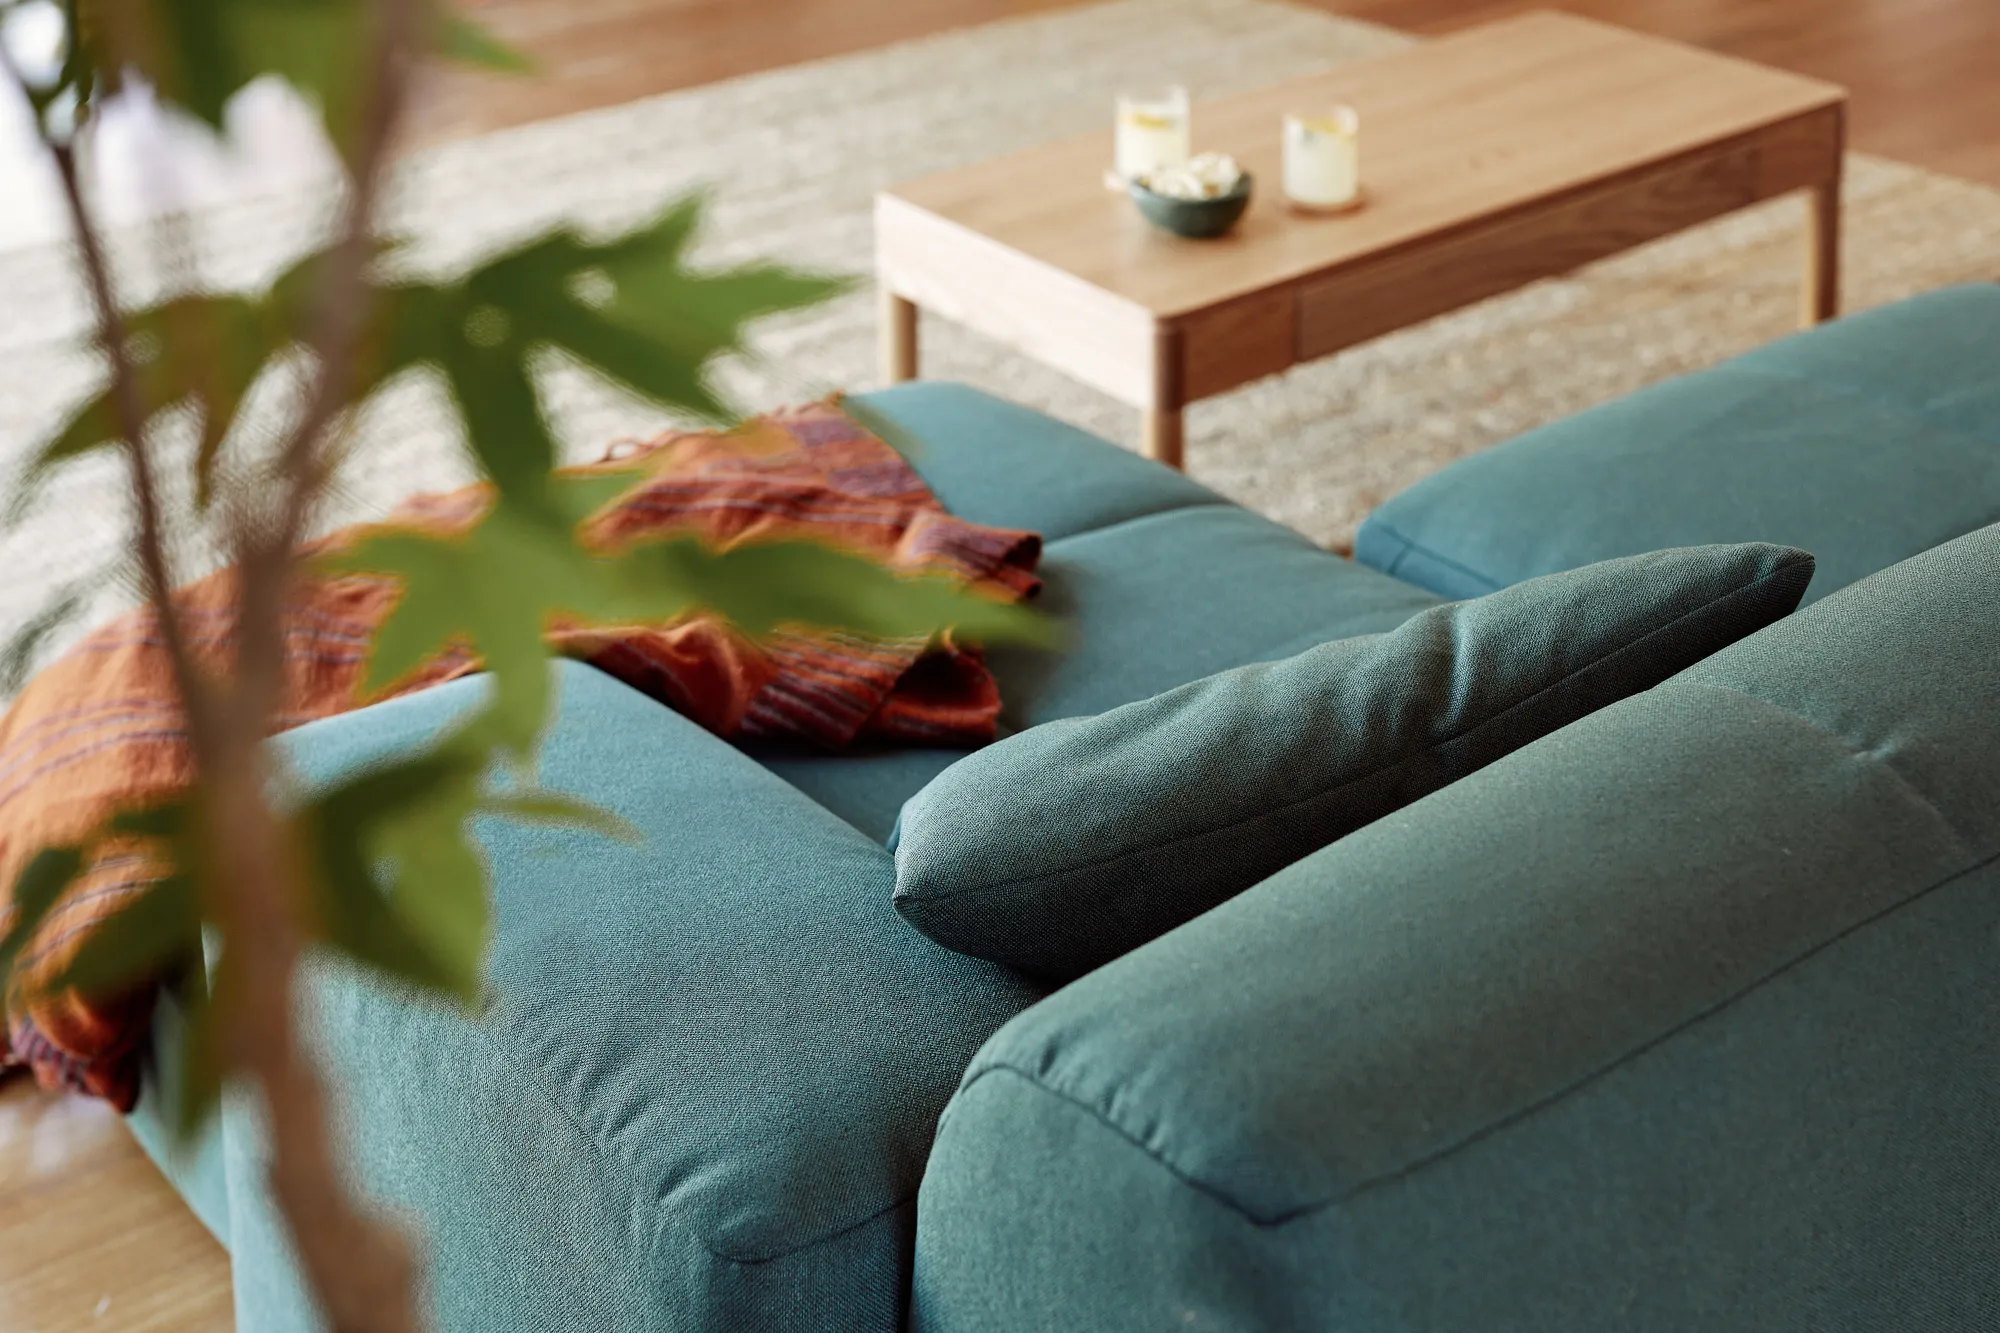 The Everyday Sofa by Eva shown in green